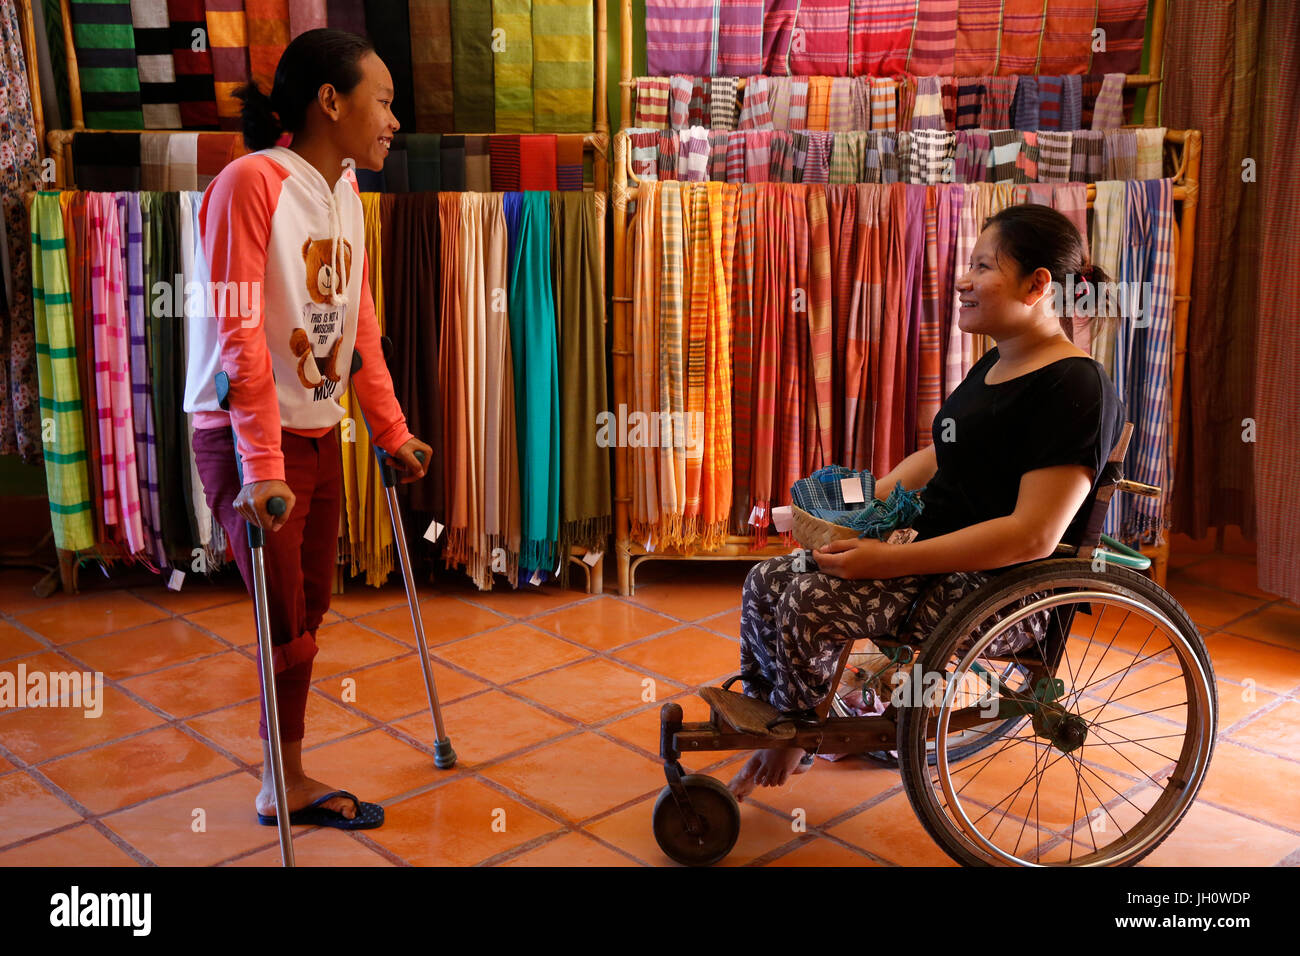 Disabled Cambodians in the Battambang catholic prefecture shop. Cambodia. Stock Photo